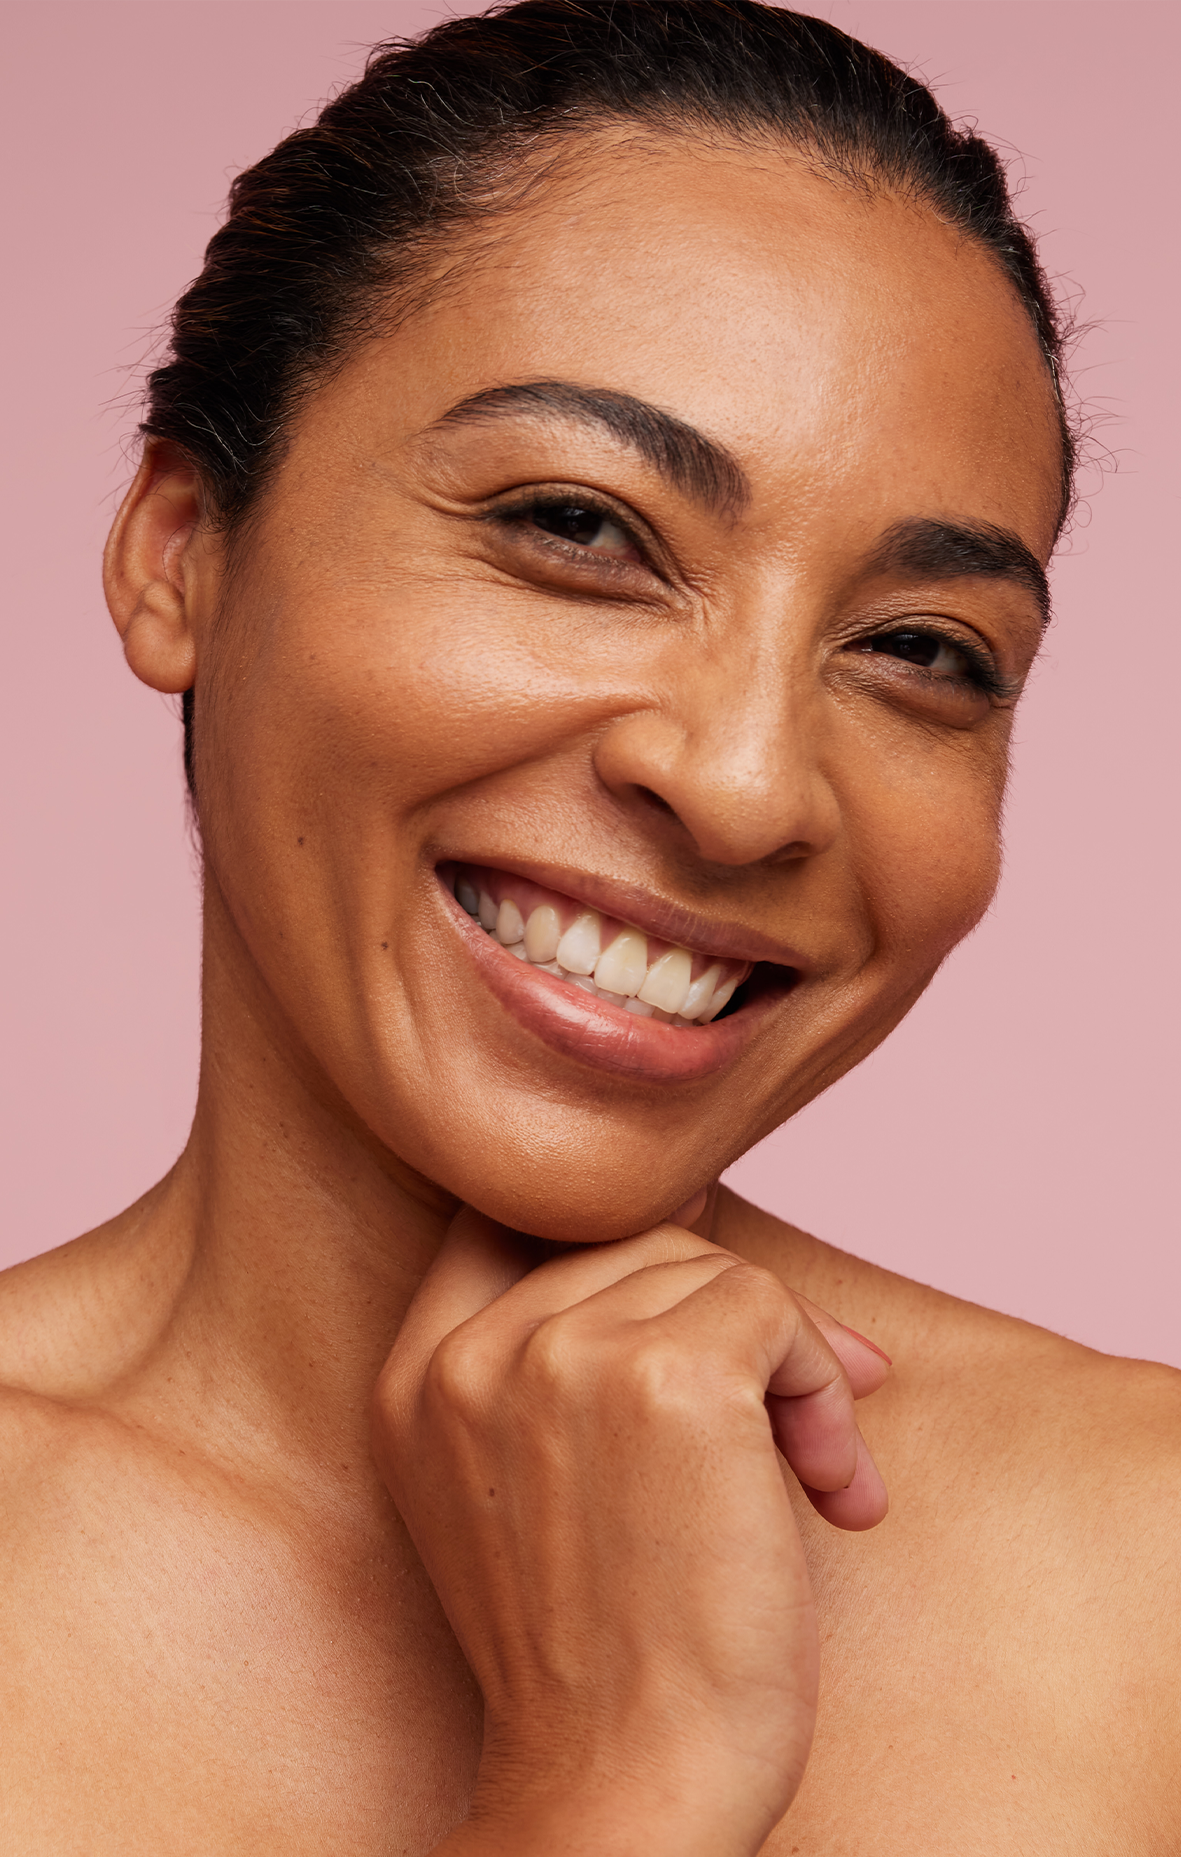 Ditch the Needles, Here's the Best Skincare for Aging Skin